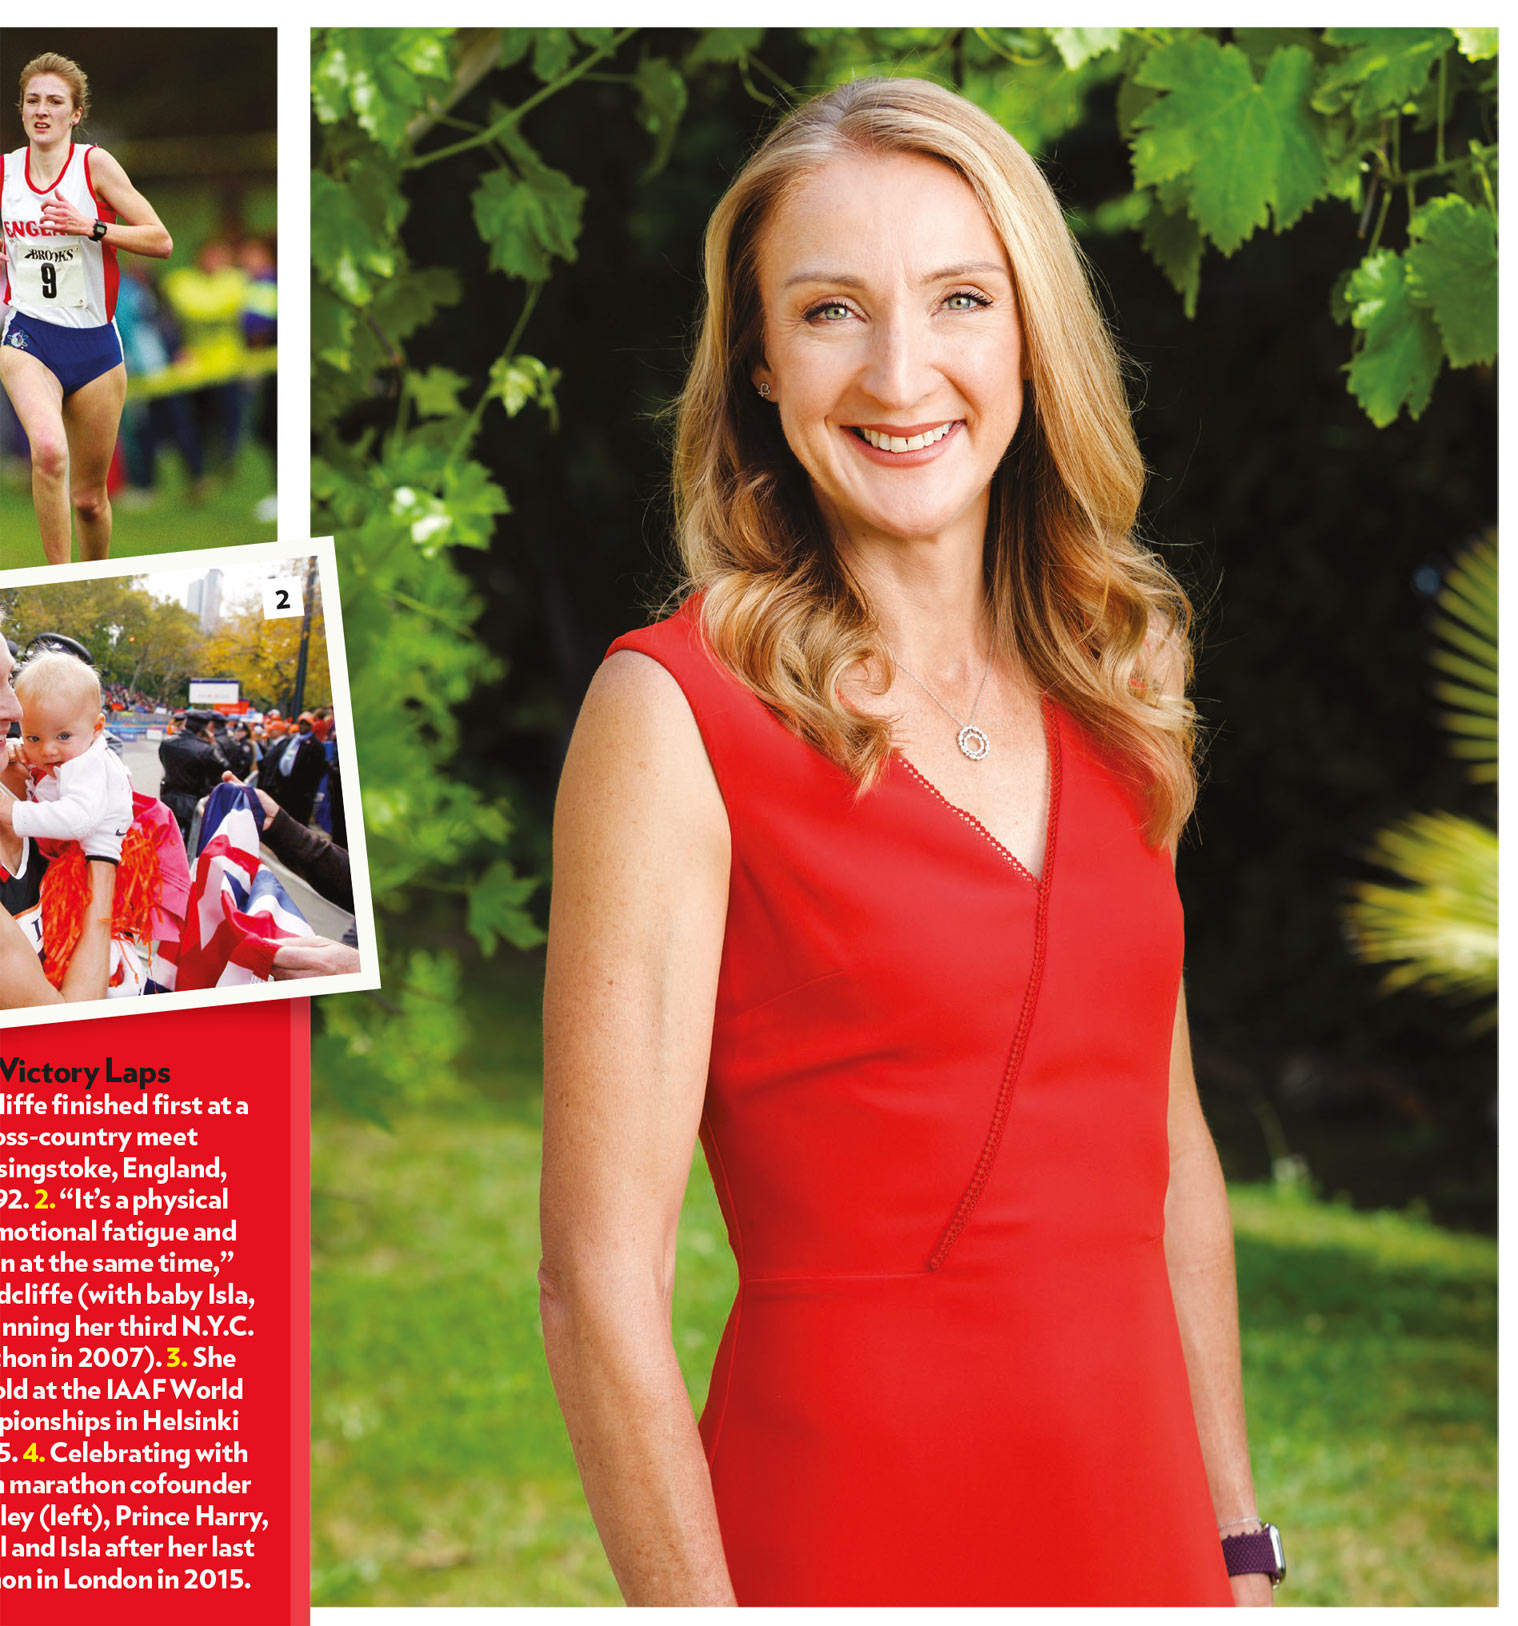 Part of an inside page of People Health magazine, showing a photograph of Paula Radcliffe in a red dress